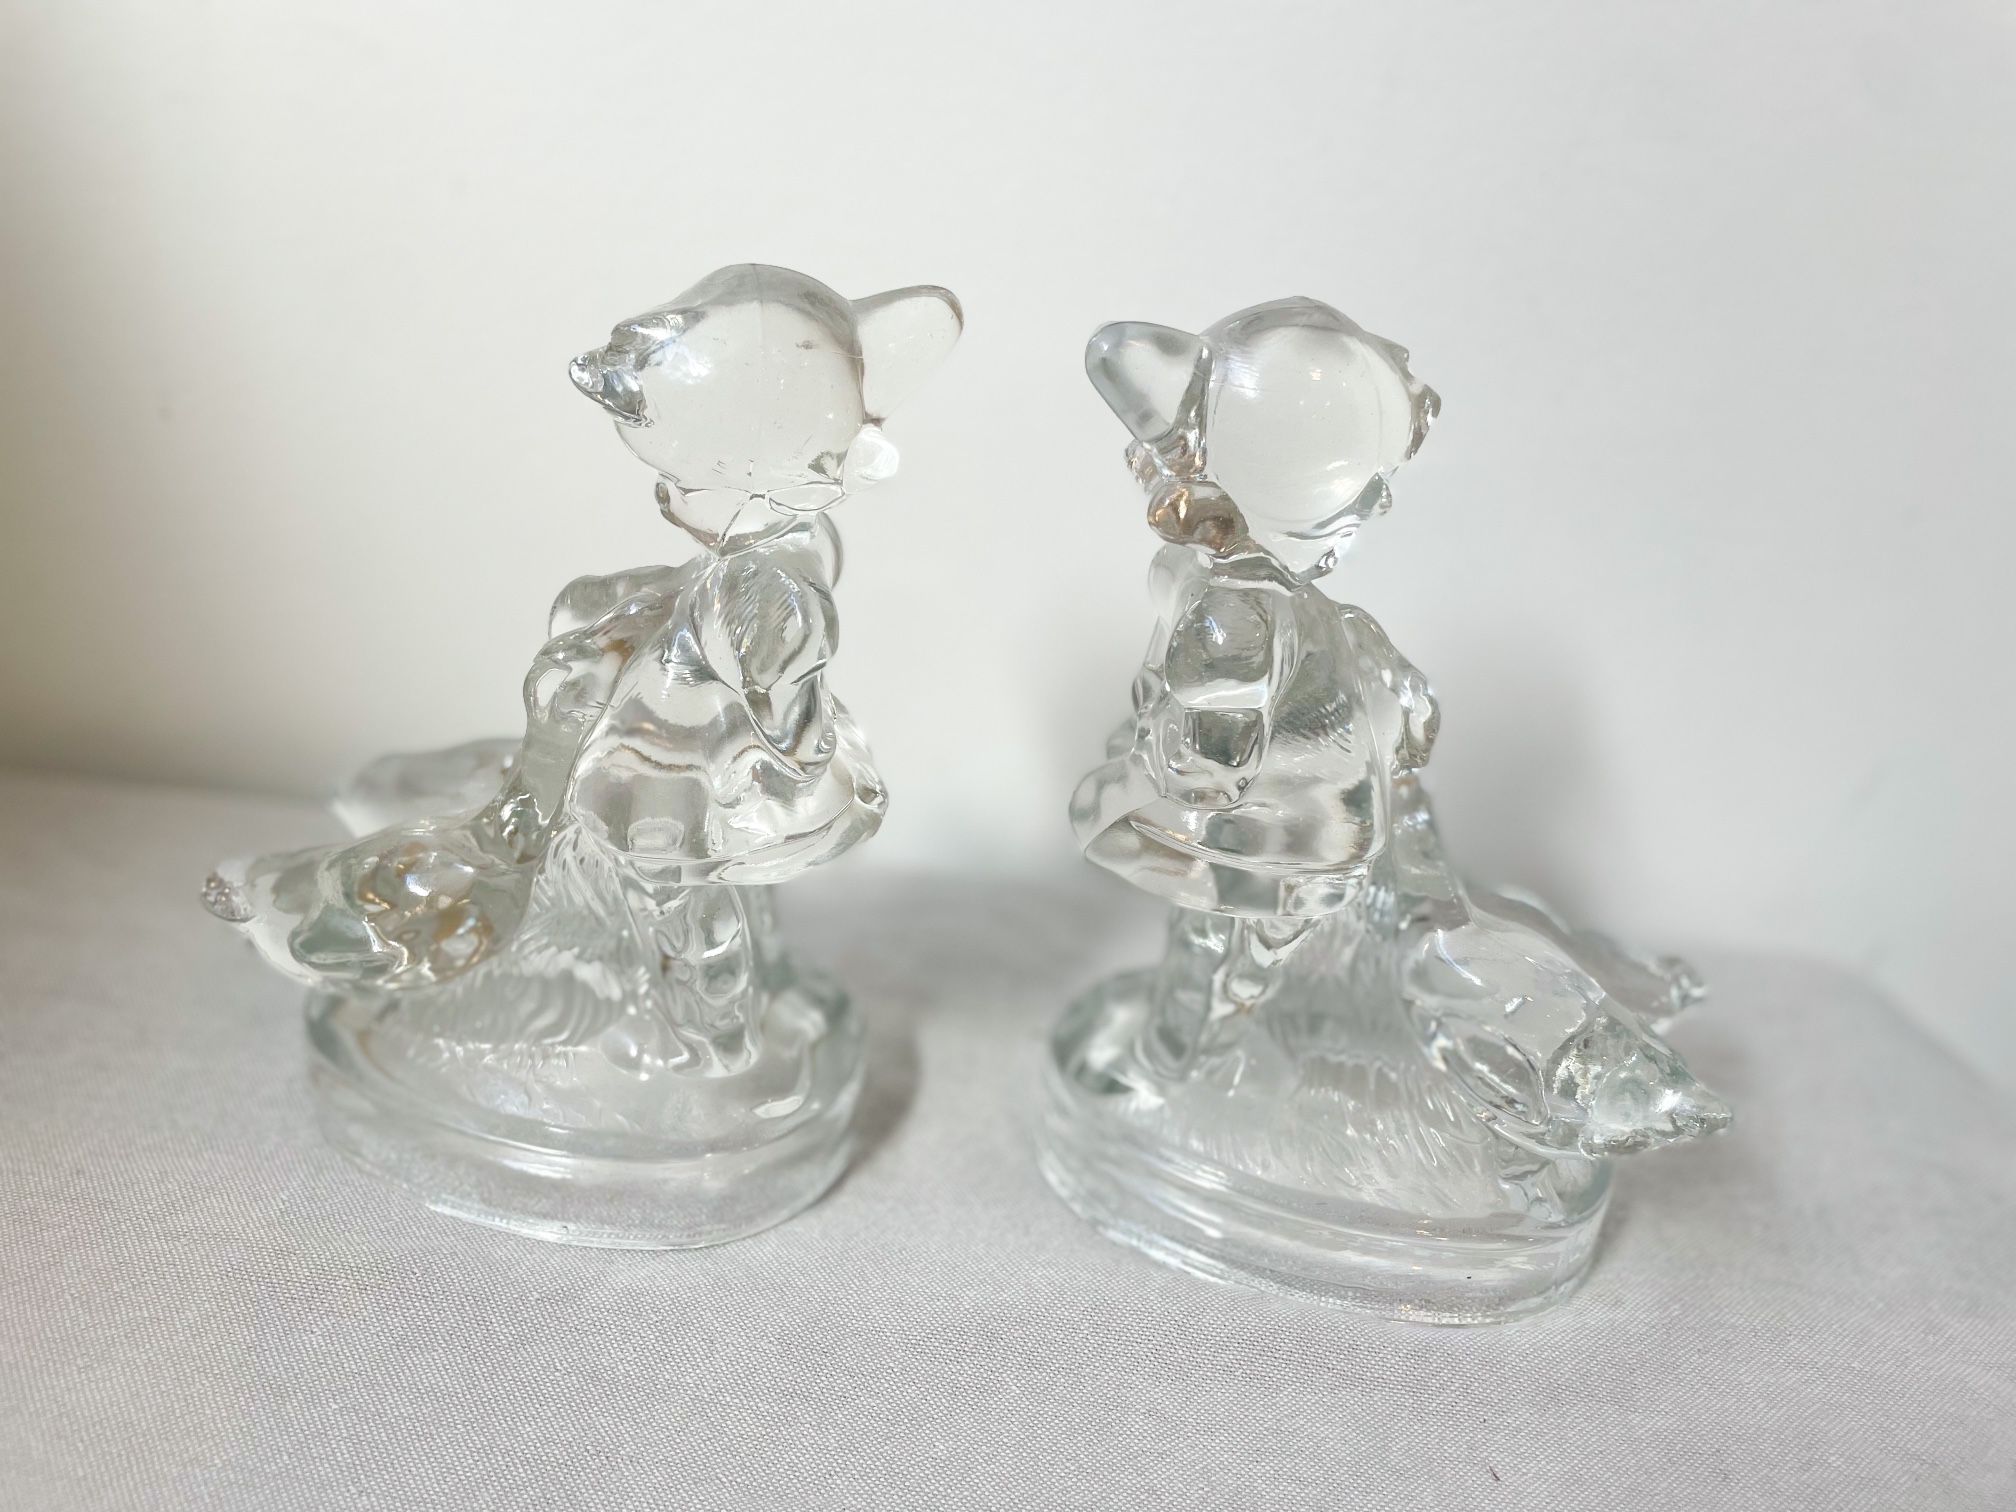 2 Vintage L. E. Smith Goose Girl Glass Figurines 1950's